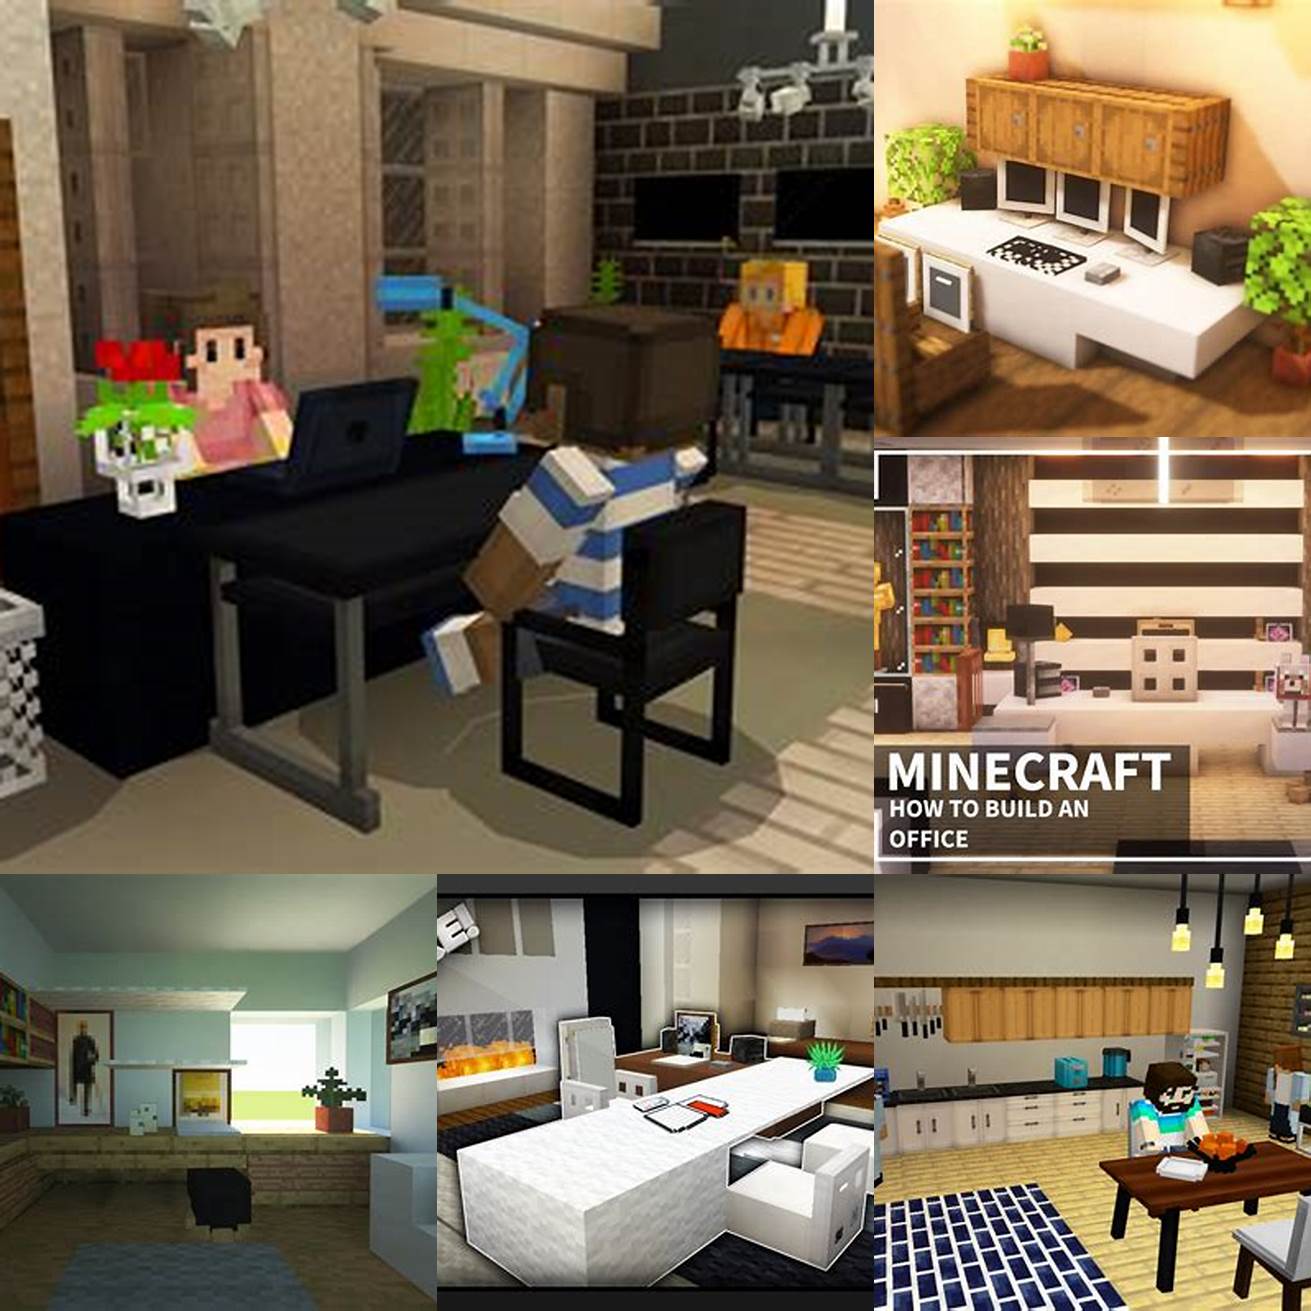 Set up a functional and professional office with the Minecraft Furniture Mod